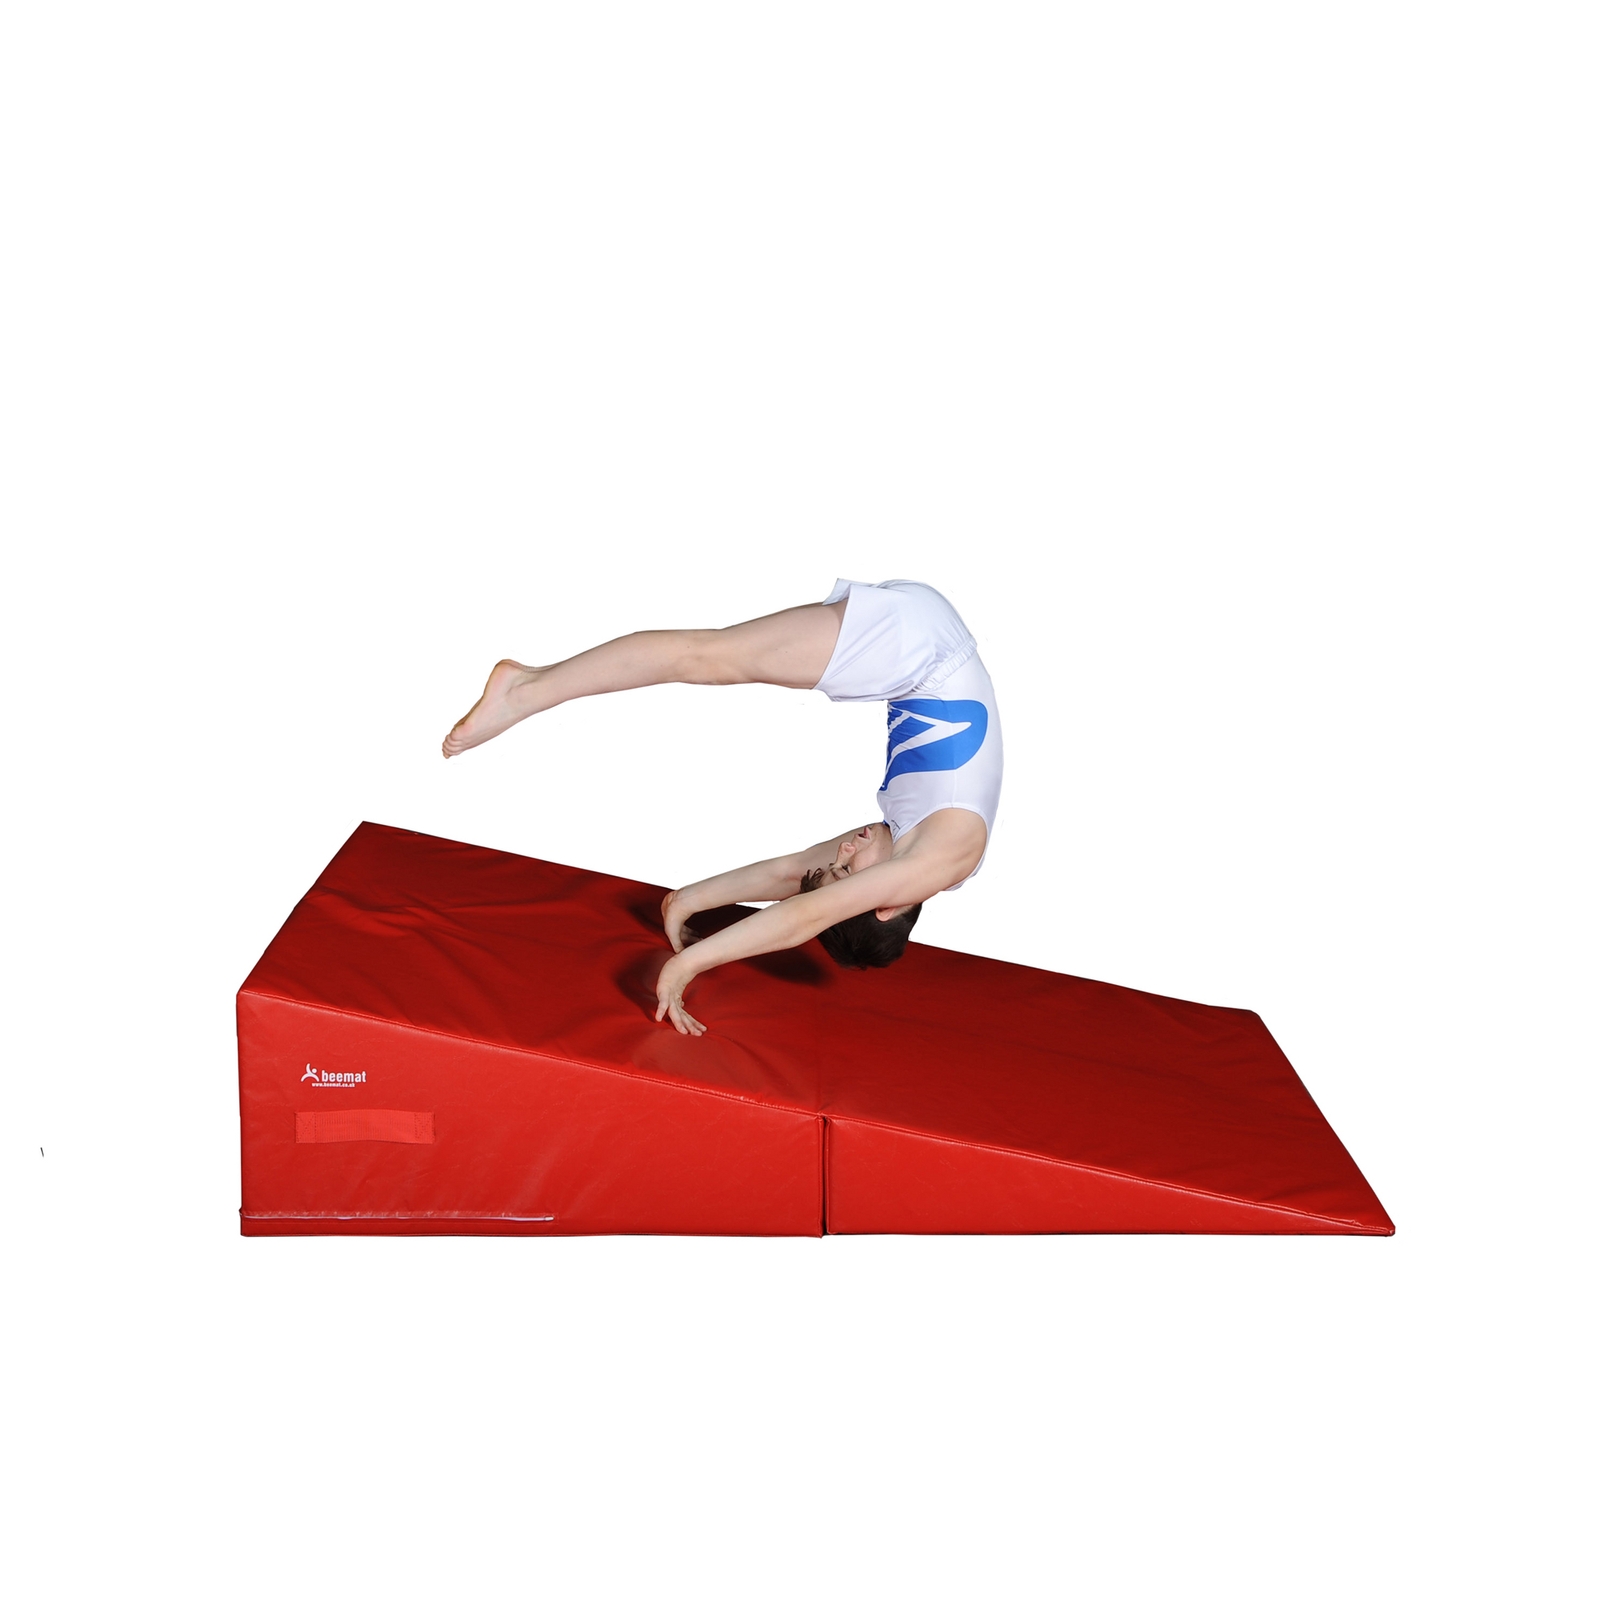 Beemat Folding Gymnastic Incline Wedge - Red